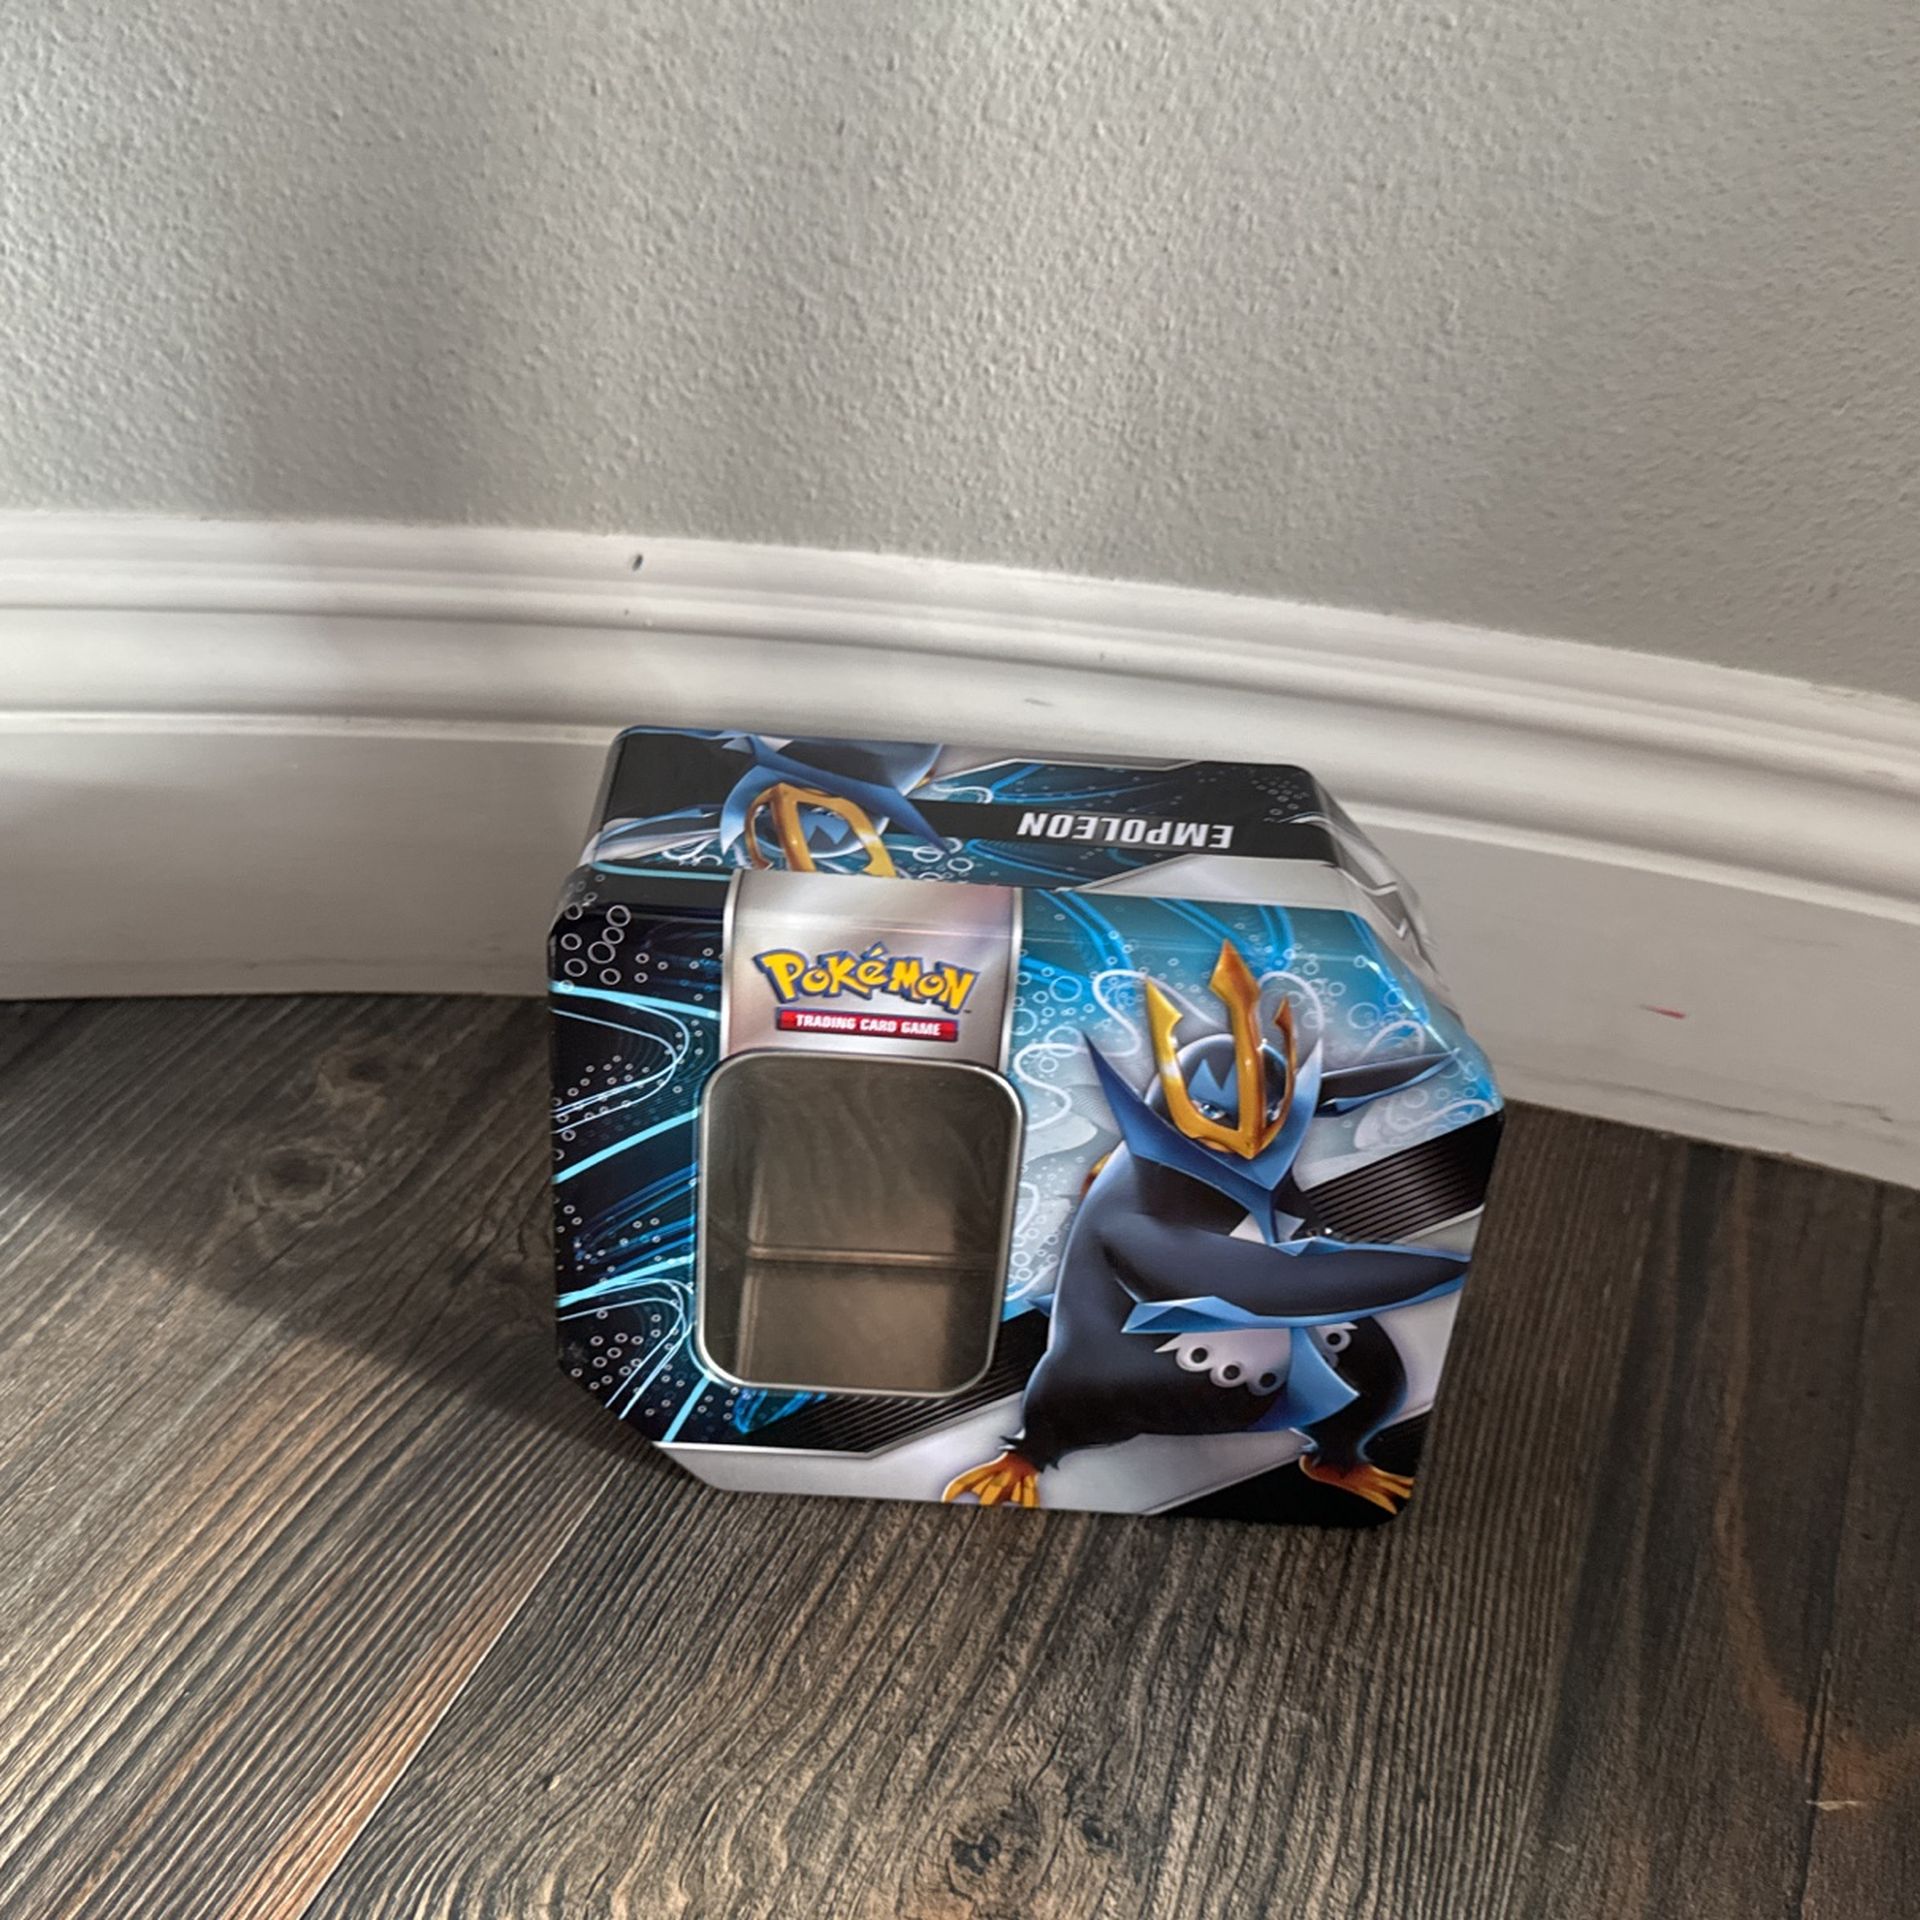 Pokémon suitcase filled with cards